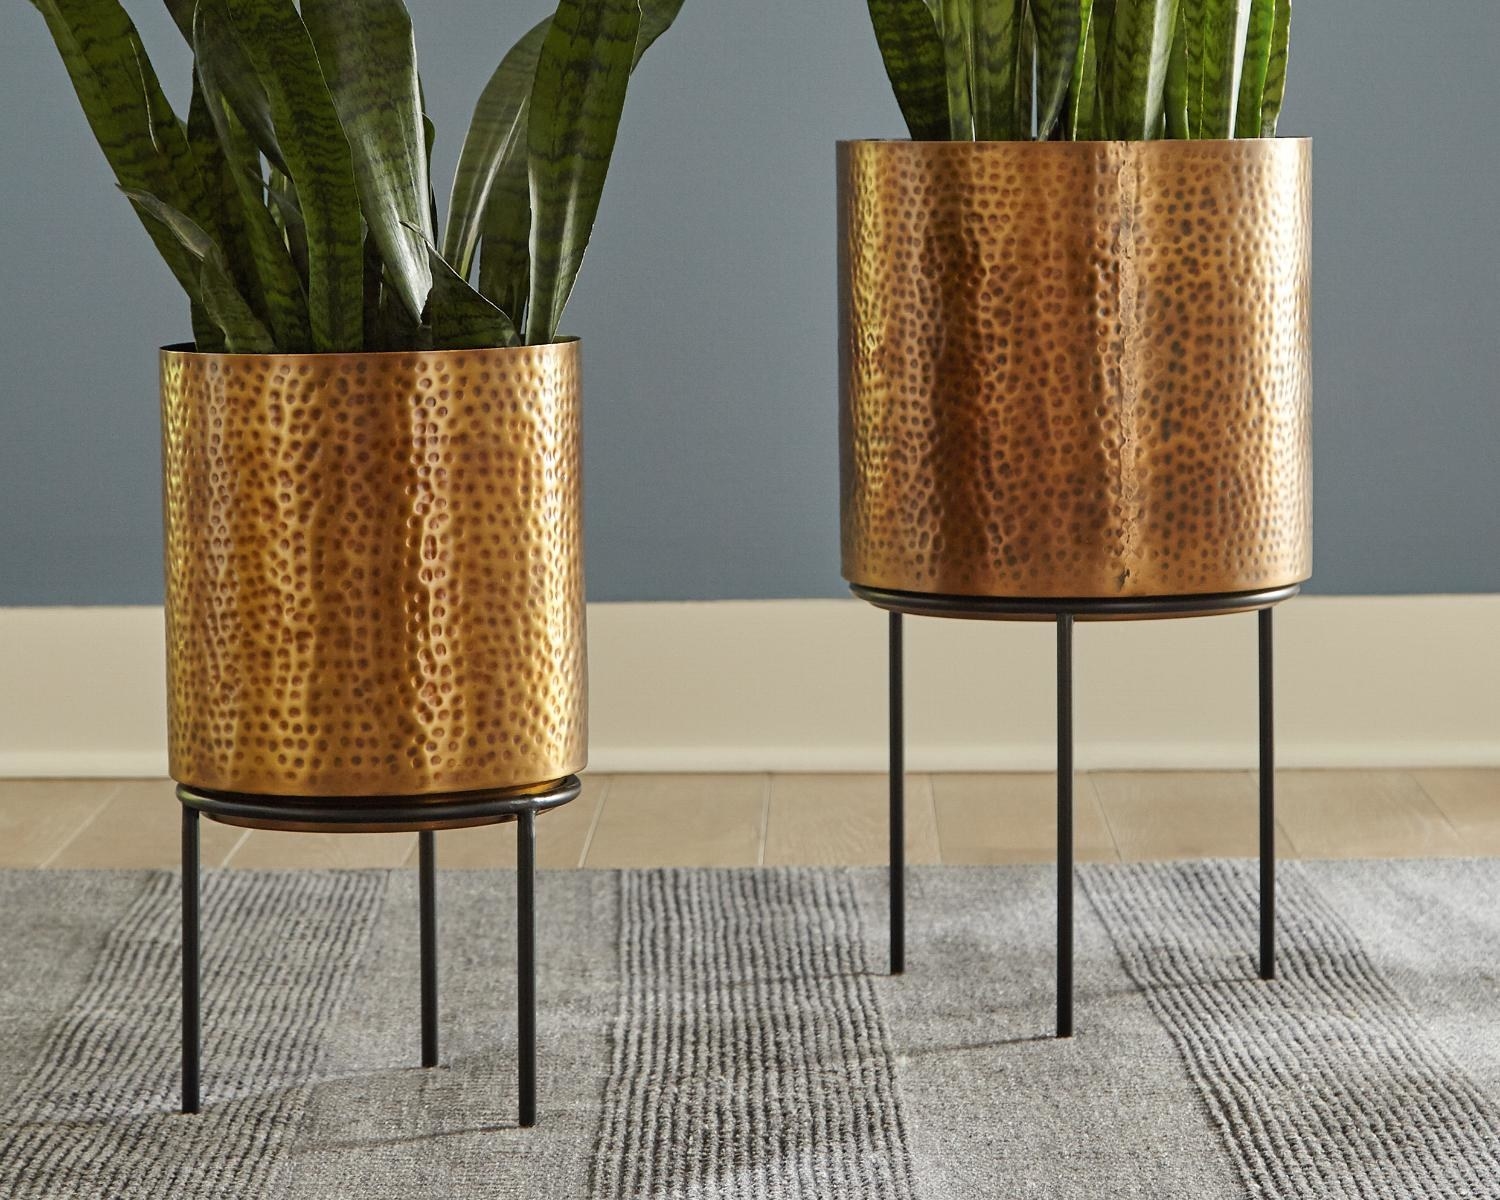 Two antique brass, hammered planters on stands